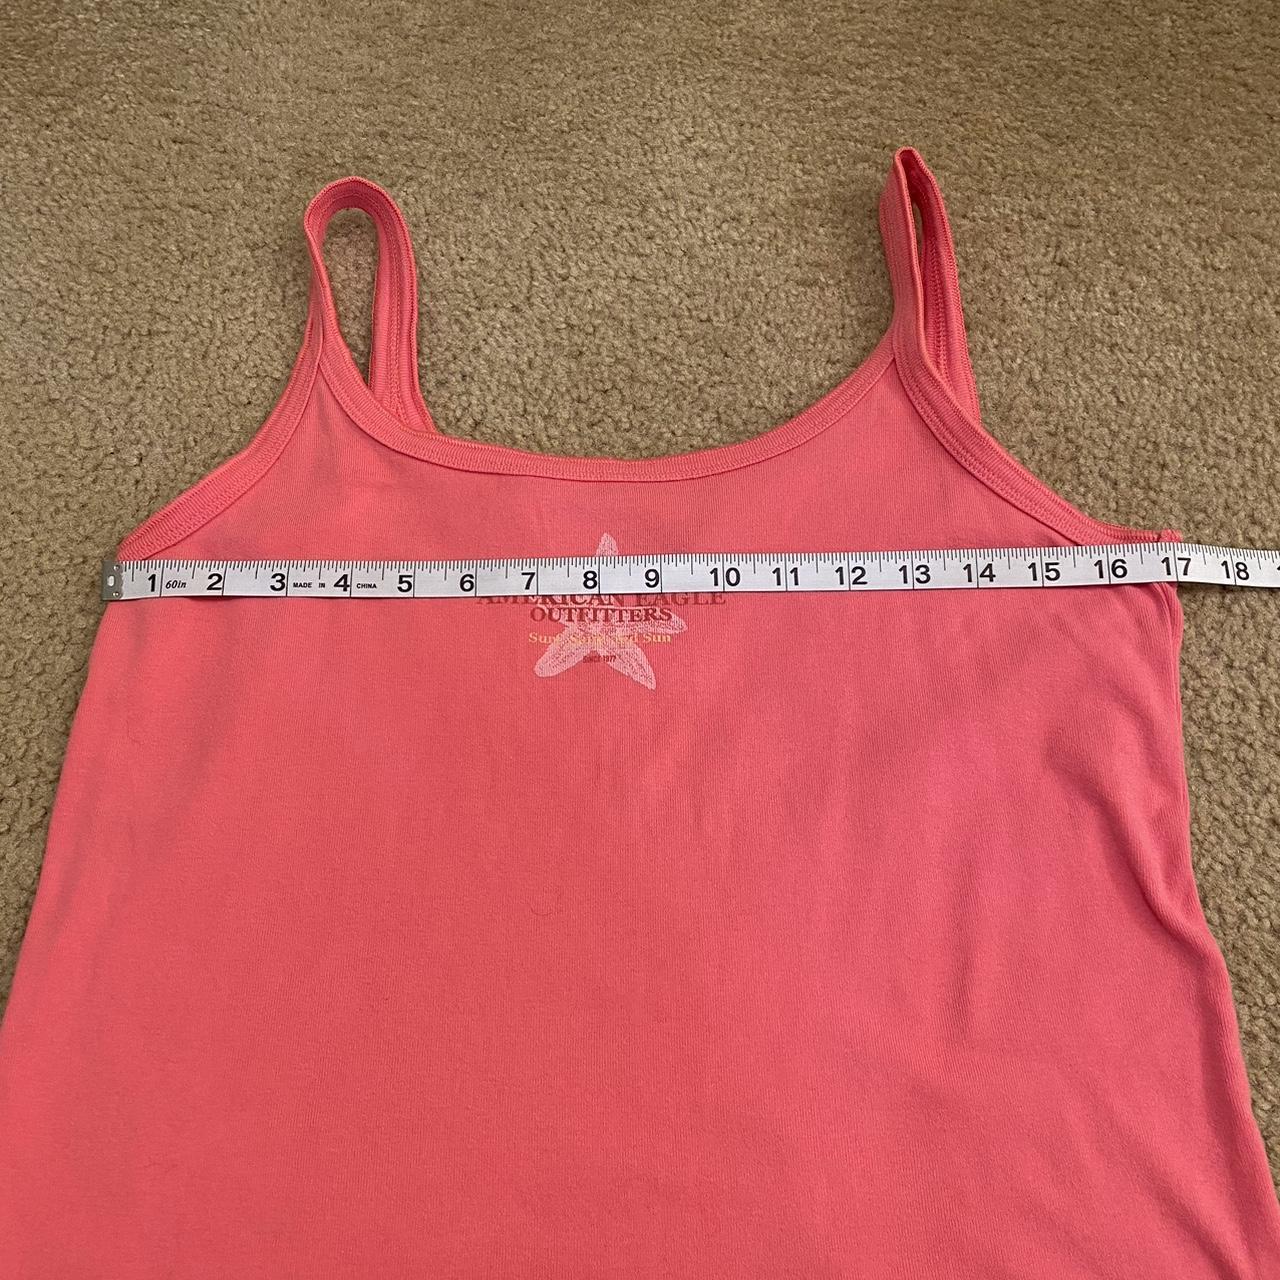 American Eagle Outfitters Women's Pink Vest | Depop